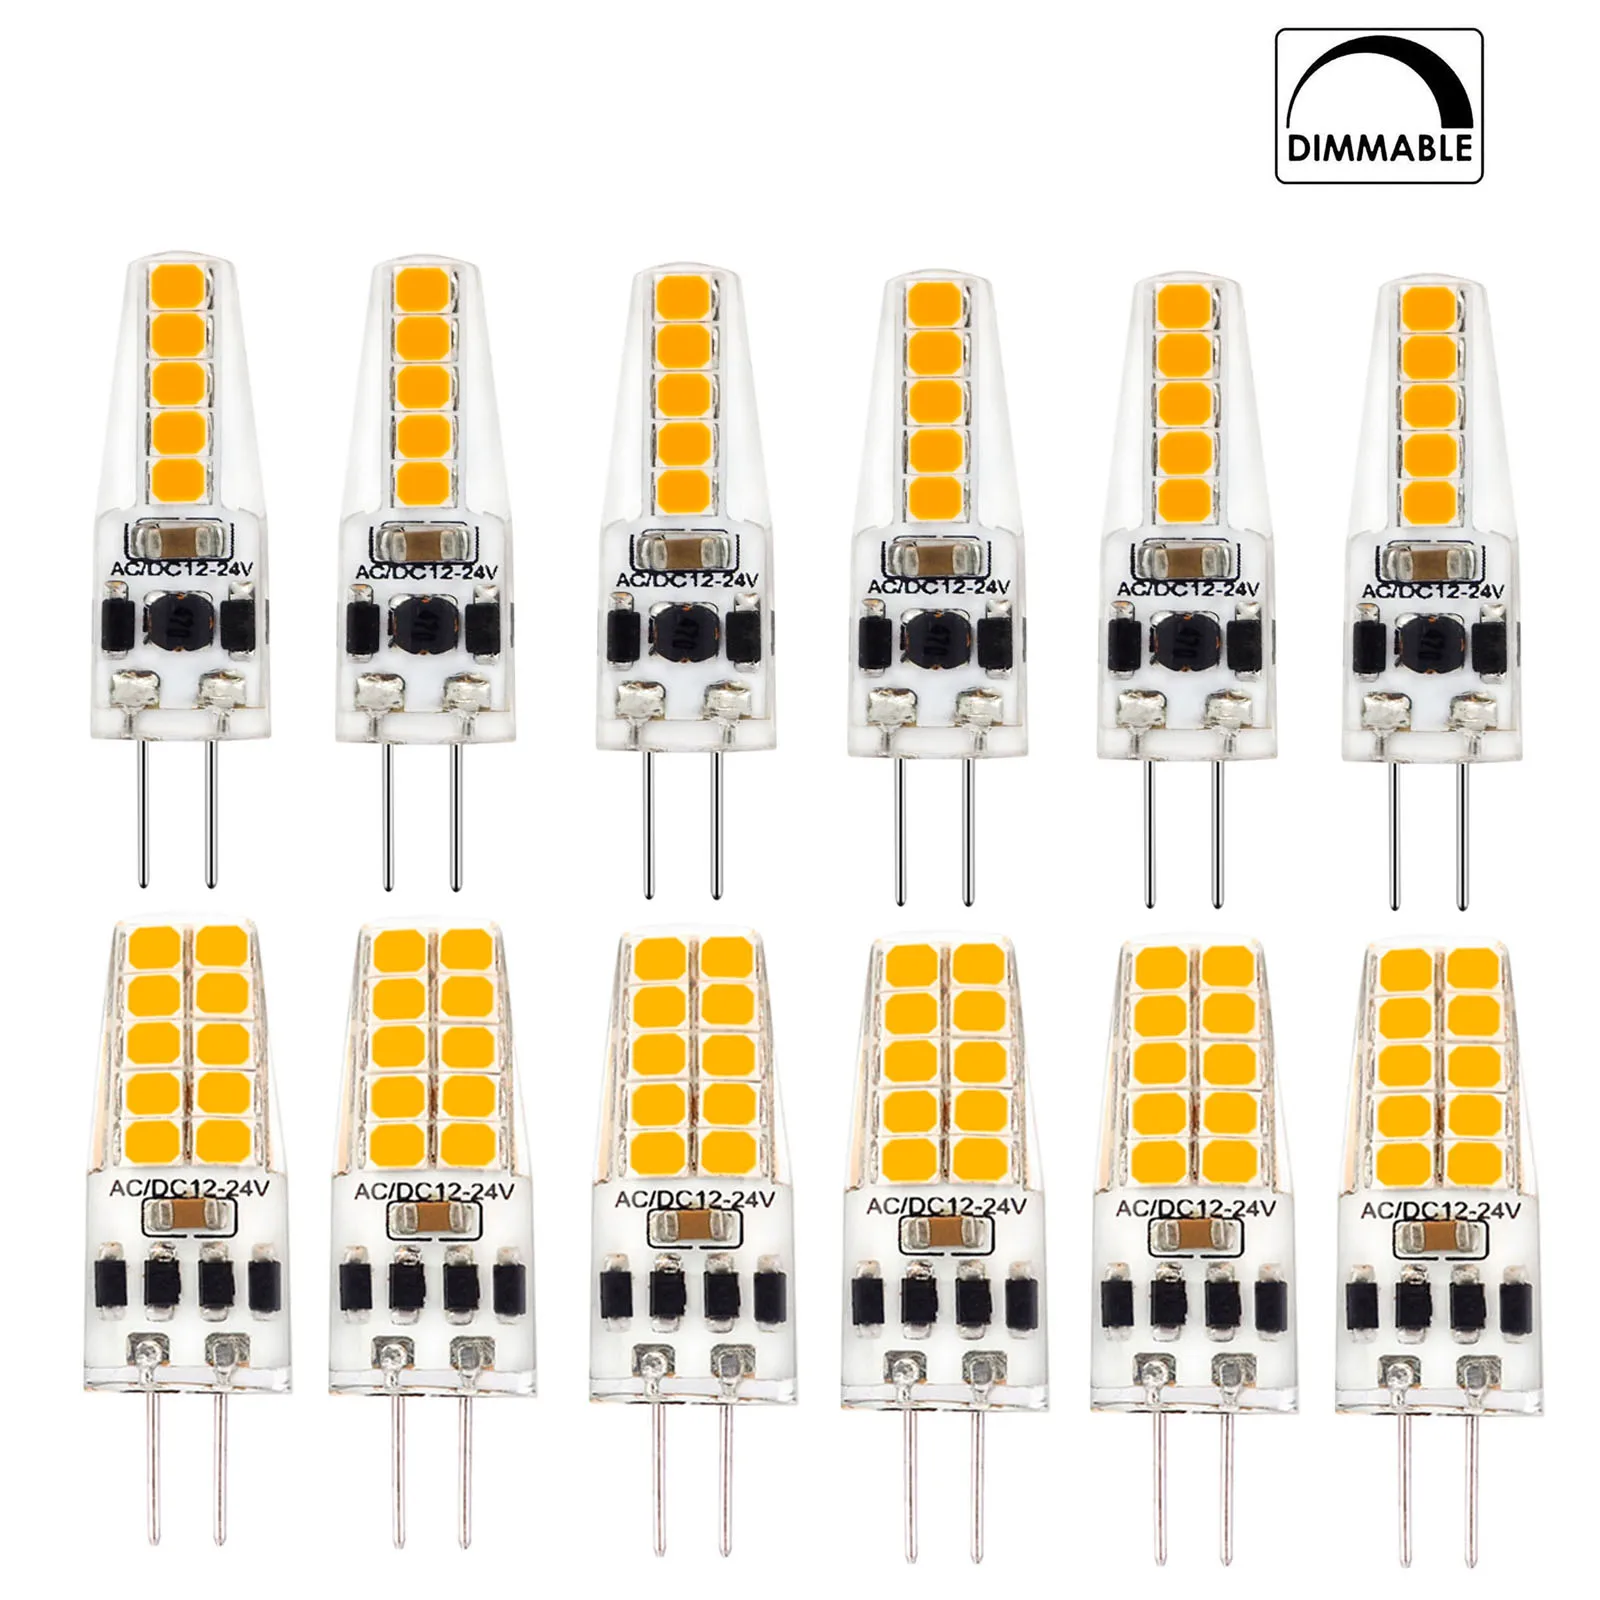 5Pcs Mini Dimmable G4 LED Silicone Crystal Light Bulbs AC/DC 12V-24V 3W 5W 2835 SMD Cold Warm Neutral White Replace Halogen Lamp